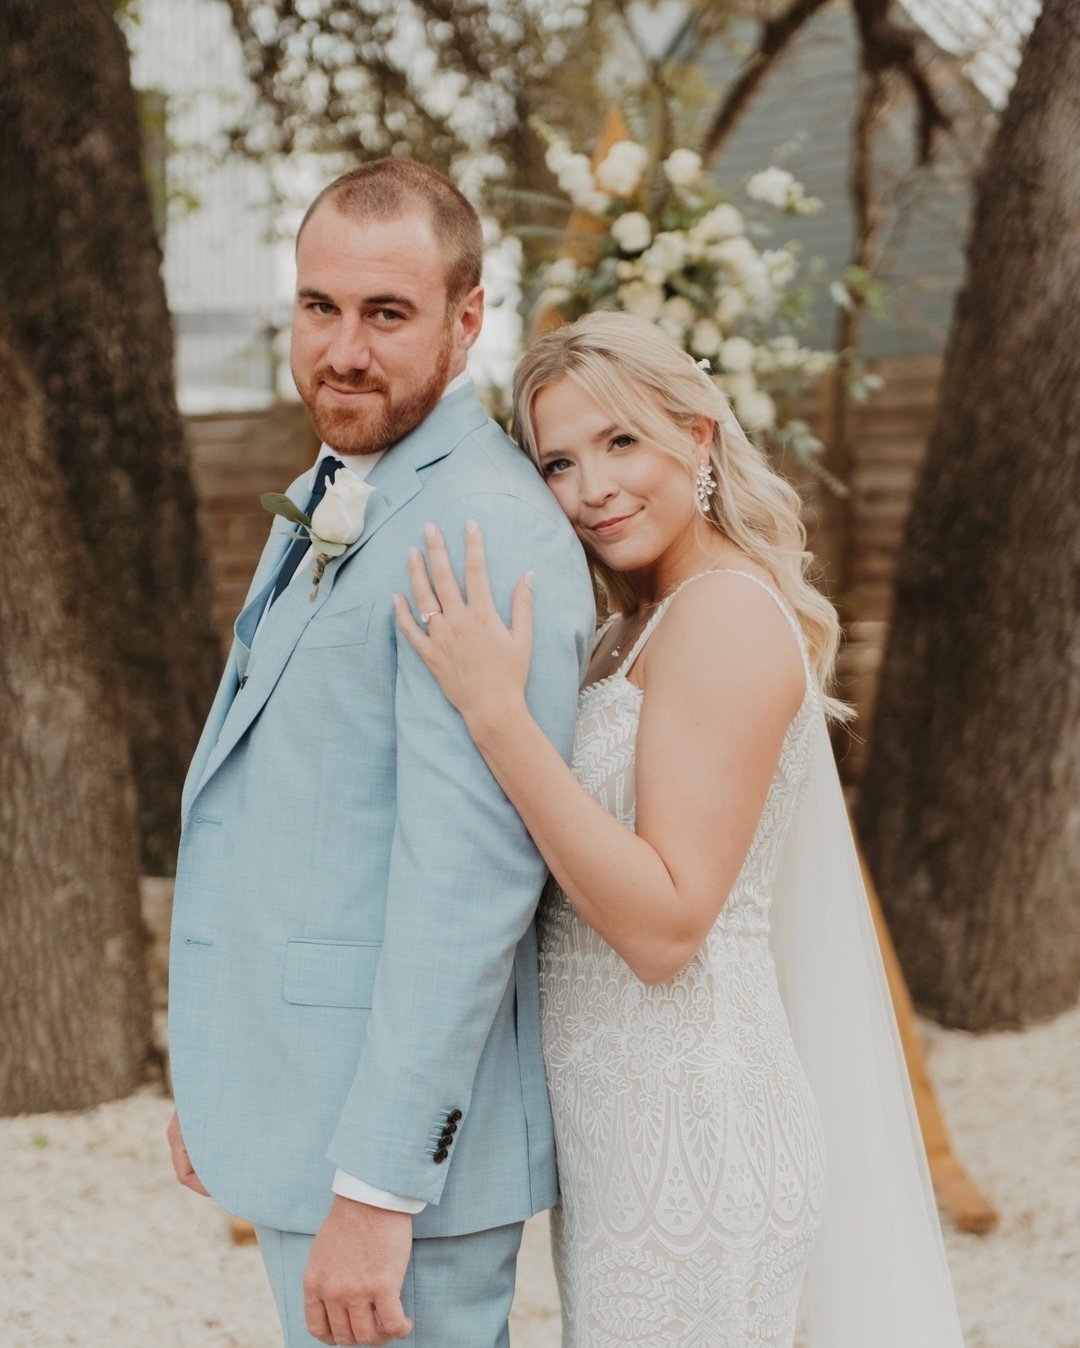 From first looks to forever love, we&rsquo;re honored to be part of their journey 💖

Hair by LUX artist - @tanya_beautyandbridal
Makeup by LUX artist - @randall_beauty
Venue - @vuka.atx
Planner - @inhershoescoordination
Photographers -  @kendallpete